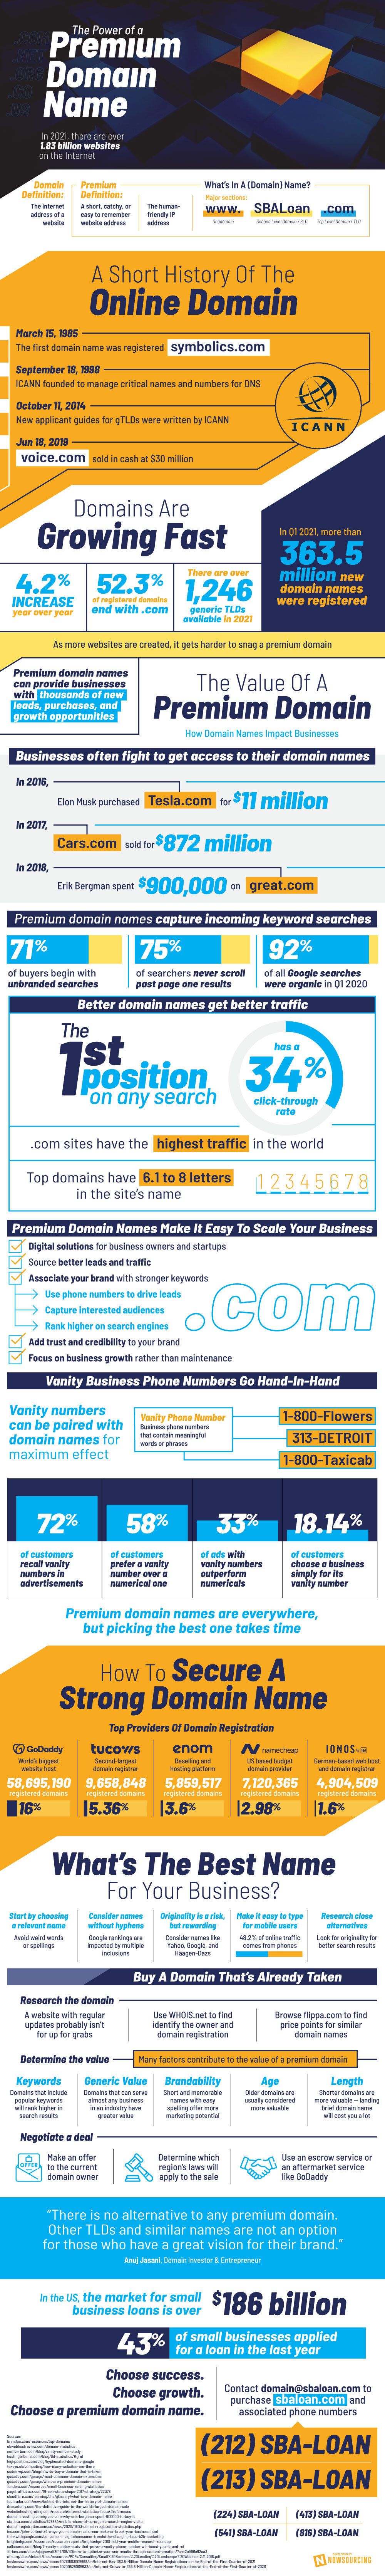 The Power of a Premium Domain Name